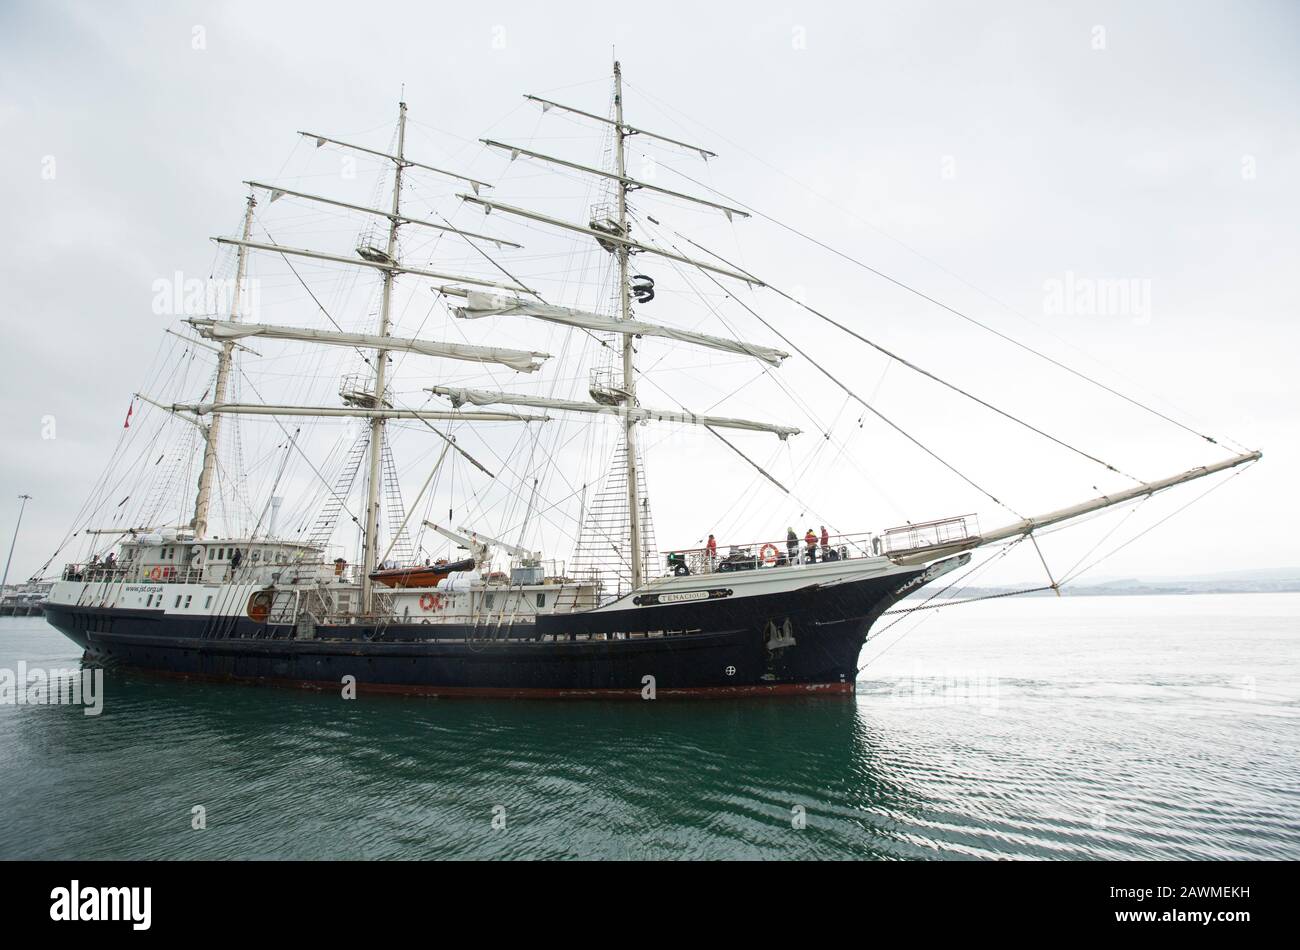 The Tall Ship Tenacious approaching Weymouth harbour in Dorset. The Tenacious was completed in 2000 and is designed for both able-bodied and disabled Stock Photo